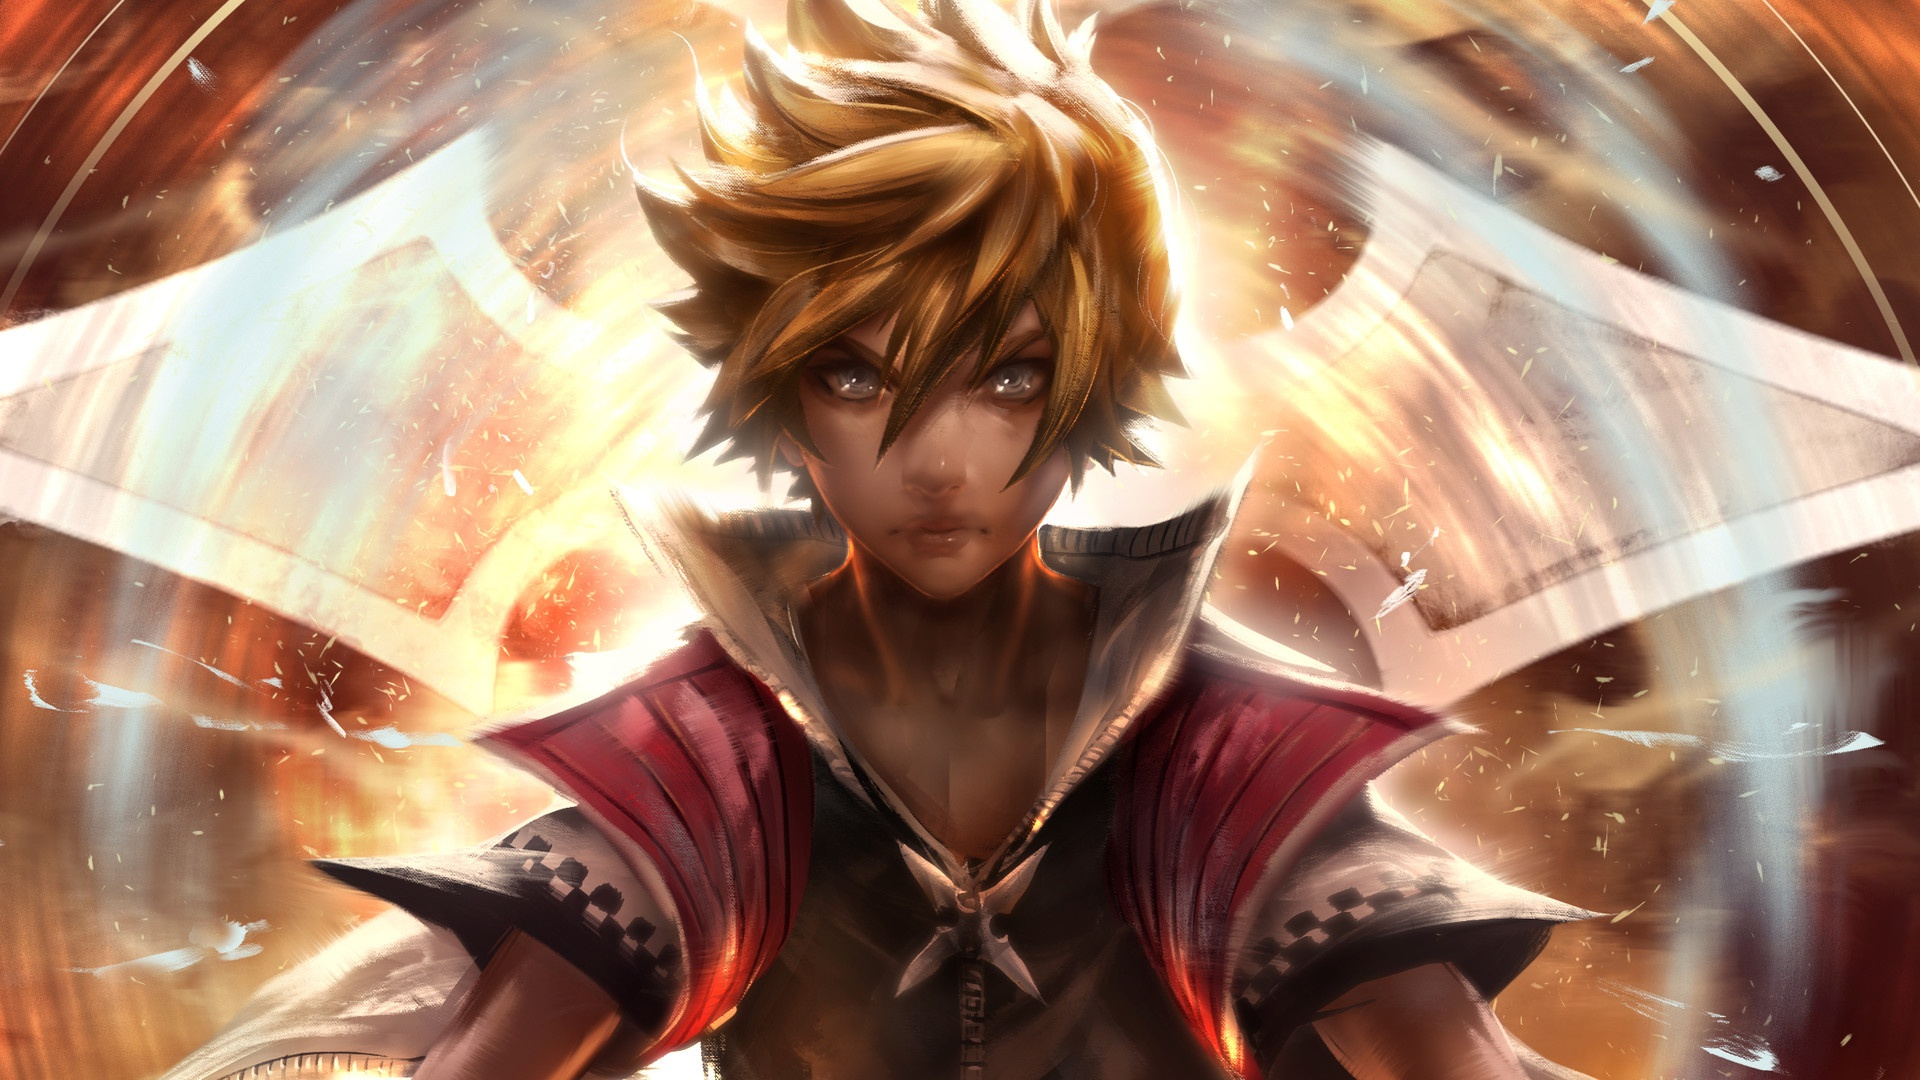 1920x1080 10+ Roxas (Kingdom Hearts) HD Wallpapers and Backgrounds